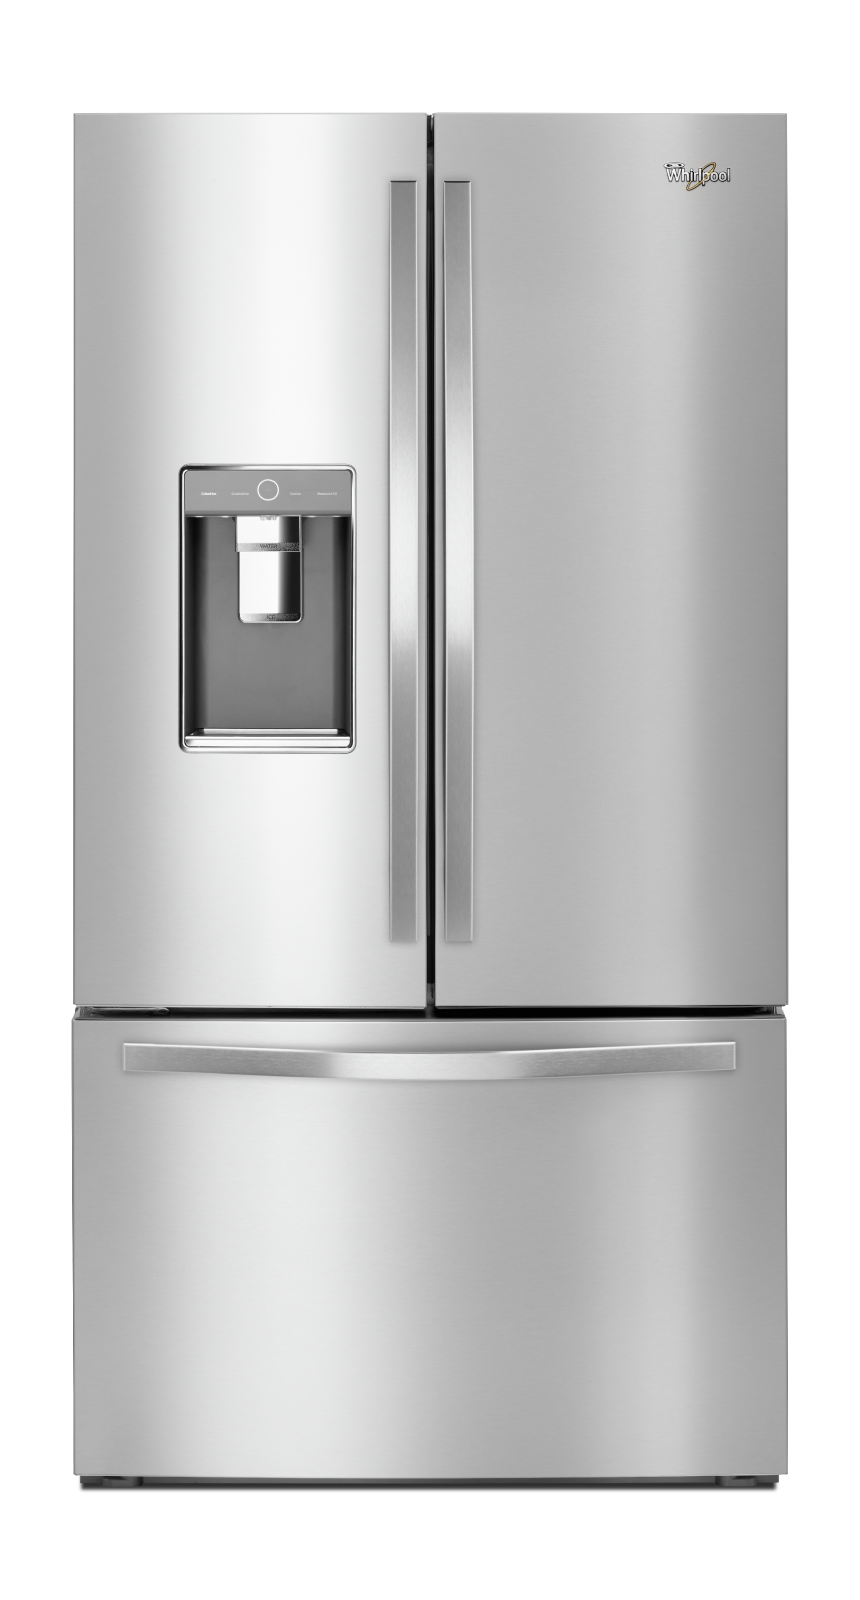 Whirlpool - 36 Inch 31.53 cu. ft French Door Refrigerator in Stainless - WRF993FIFM